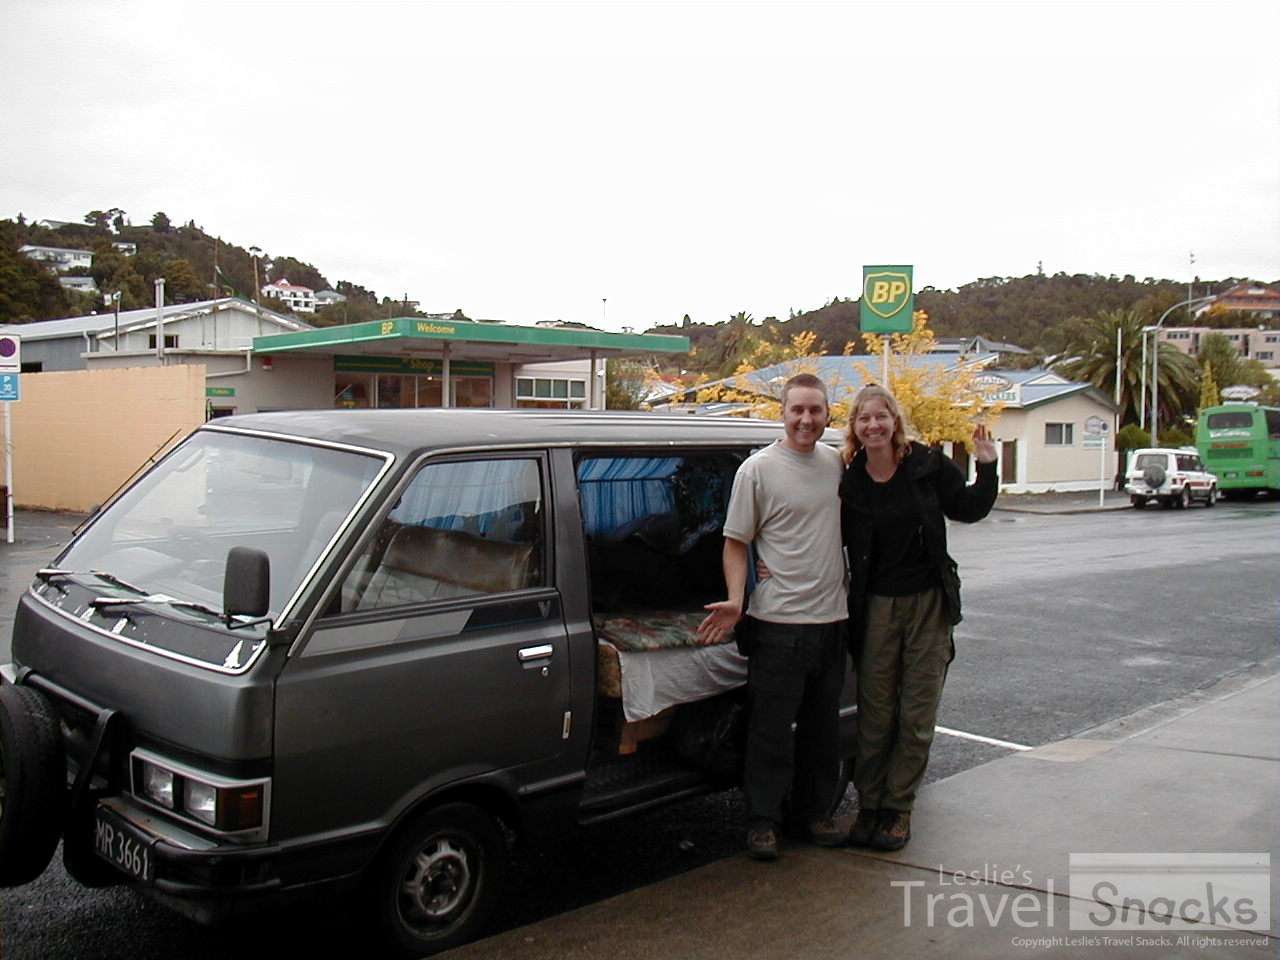 We bought this van and had to pay $9 at the post office to register it.